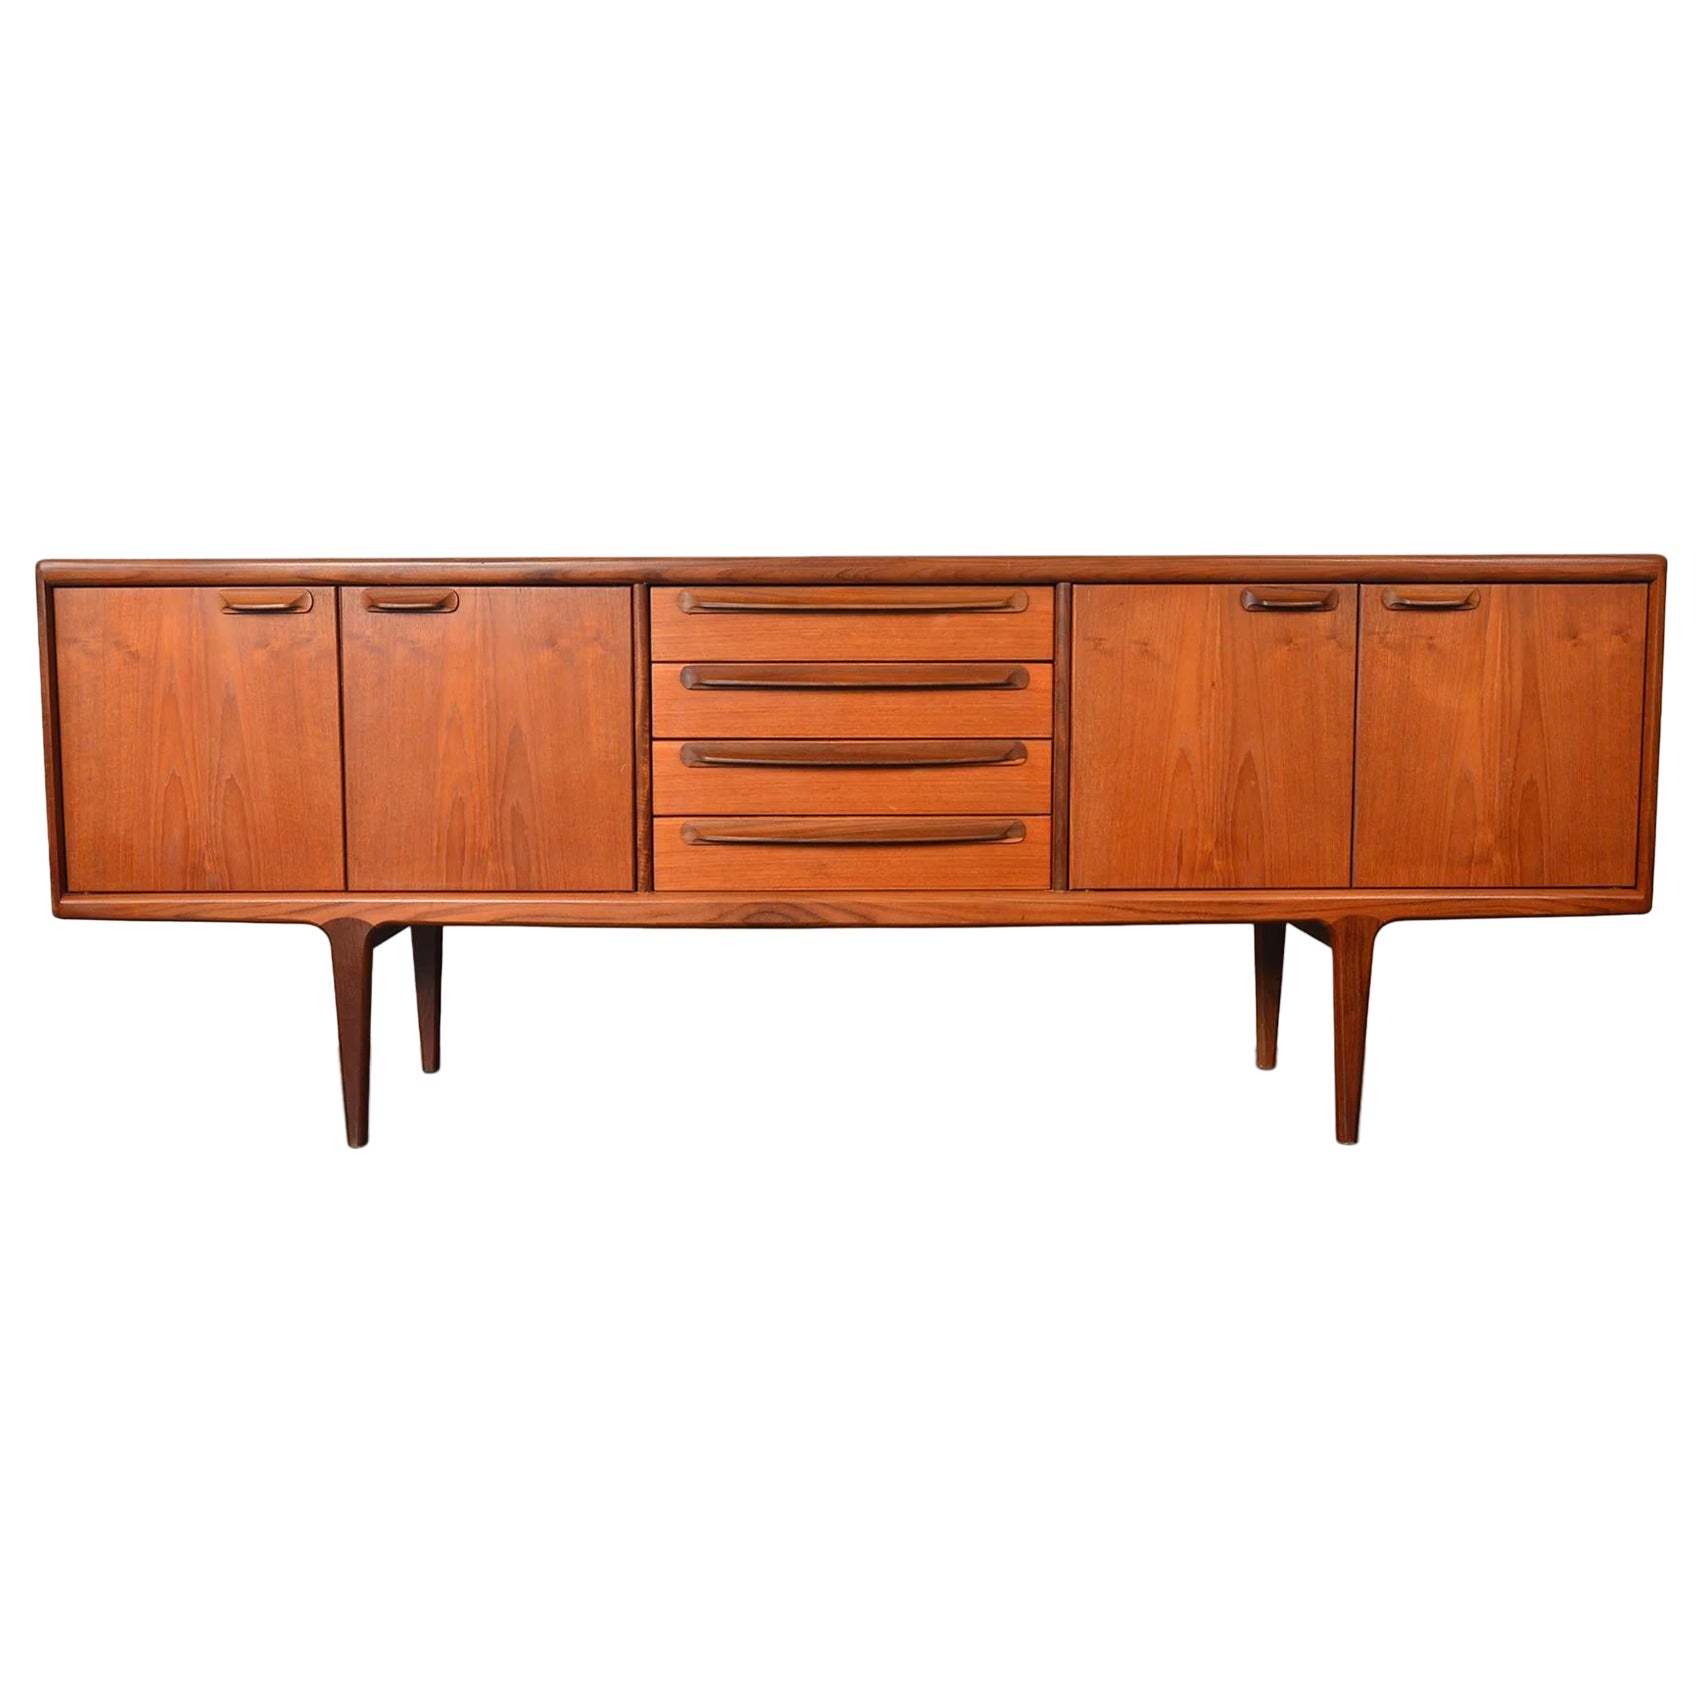 Large Teak Credenza by A. Younger Ltd